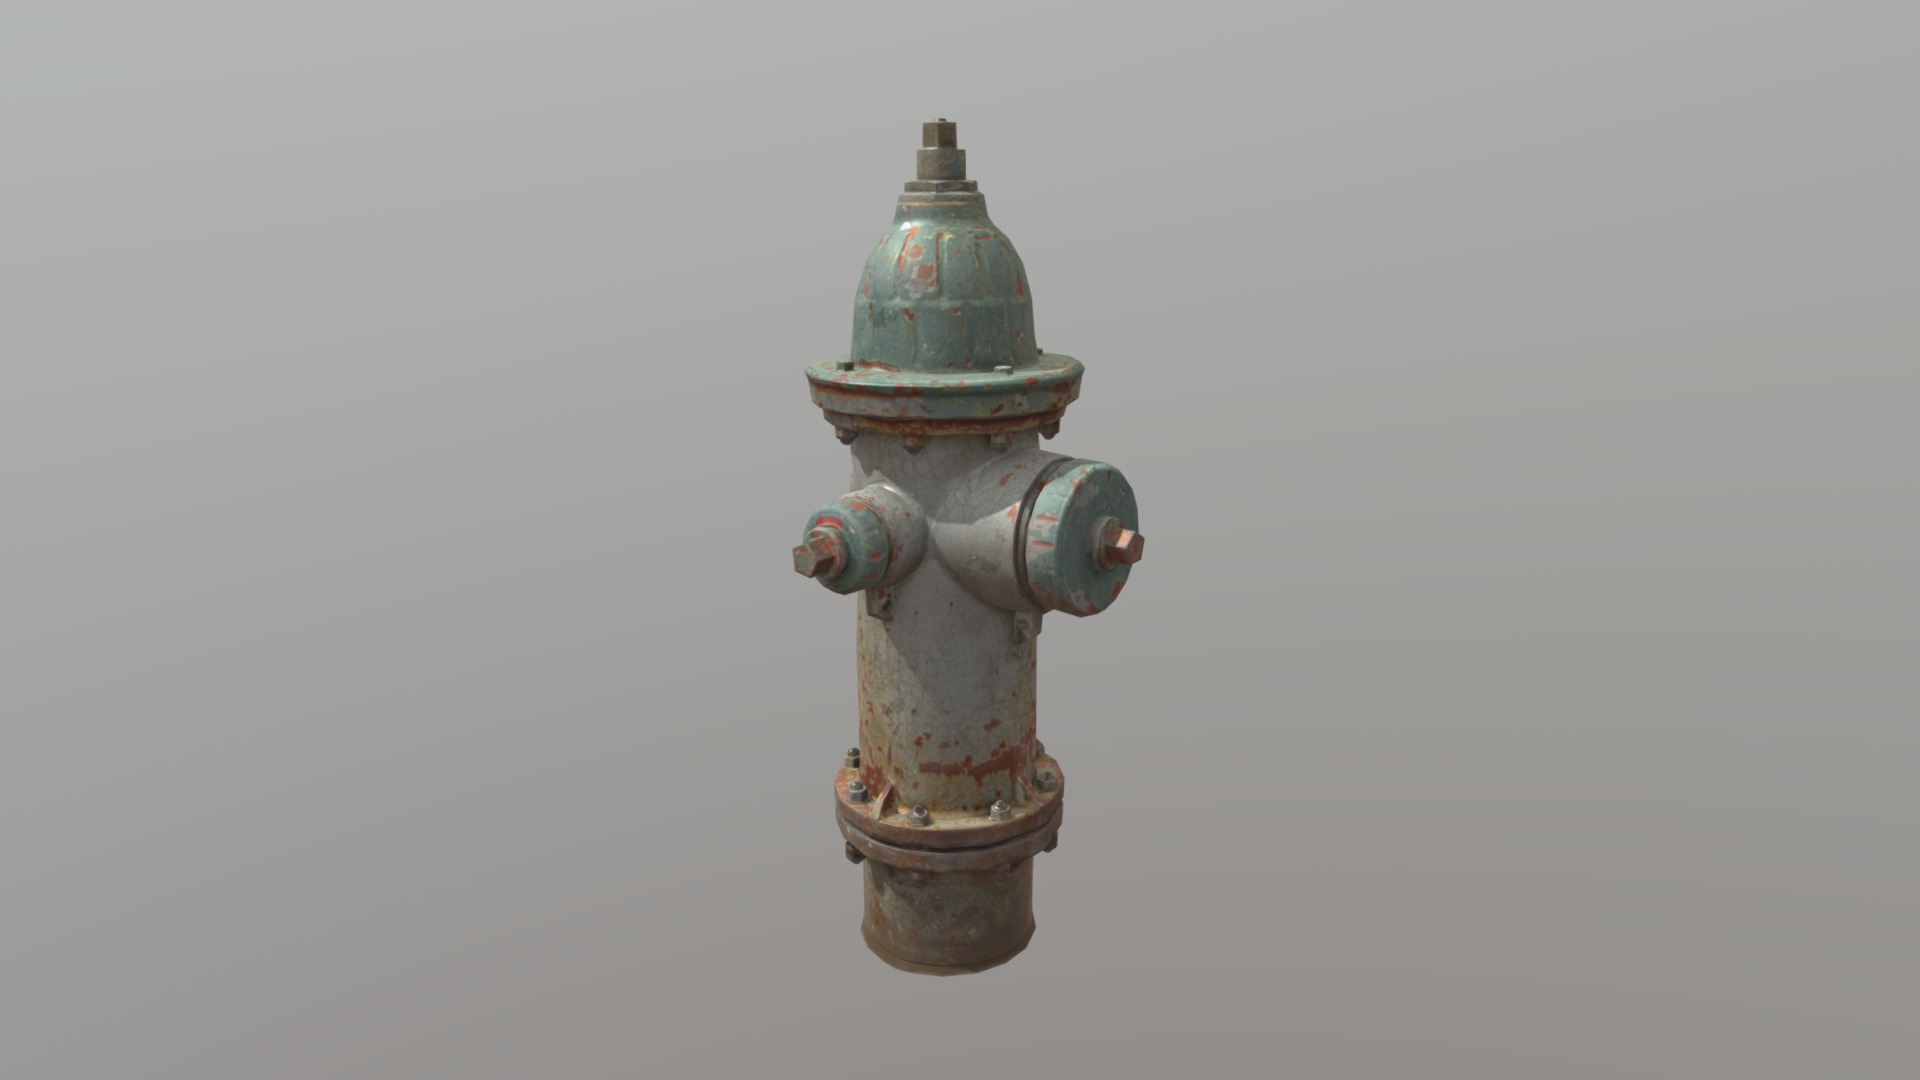 3D model Fire Hydrant 3D Scan (Game Ready) - This is a 3D model of the Fire Hydrant 3D Scan (Game Ready). The 3D model is about a fire hydrant with a green top.